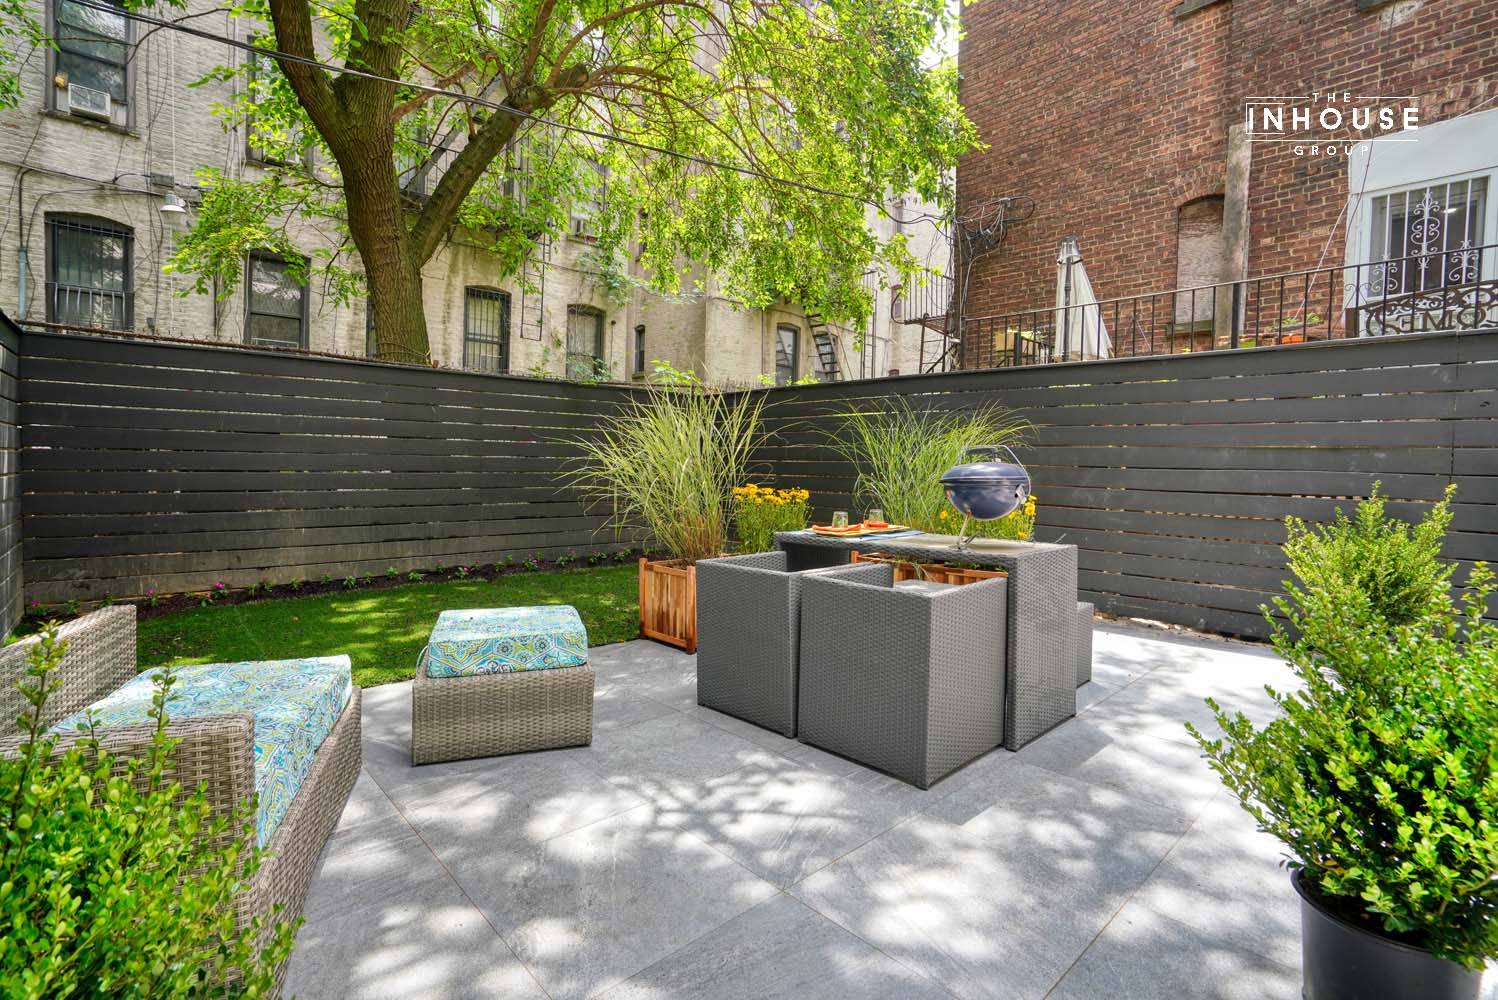 Introducing a Remarkable Duplex Condo with a private backyard in the Heart of Historic Crown Heights !